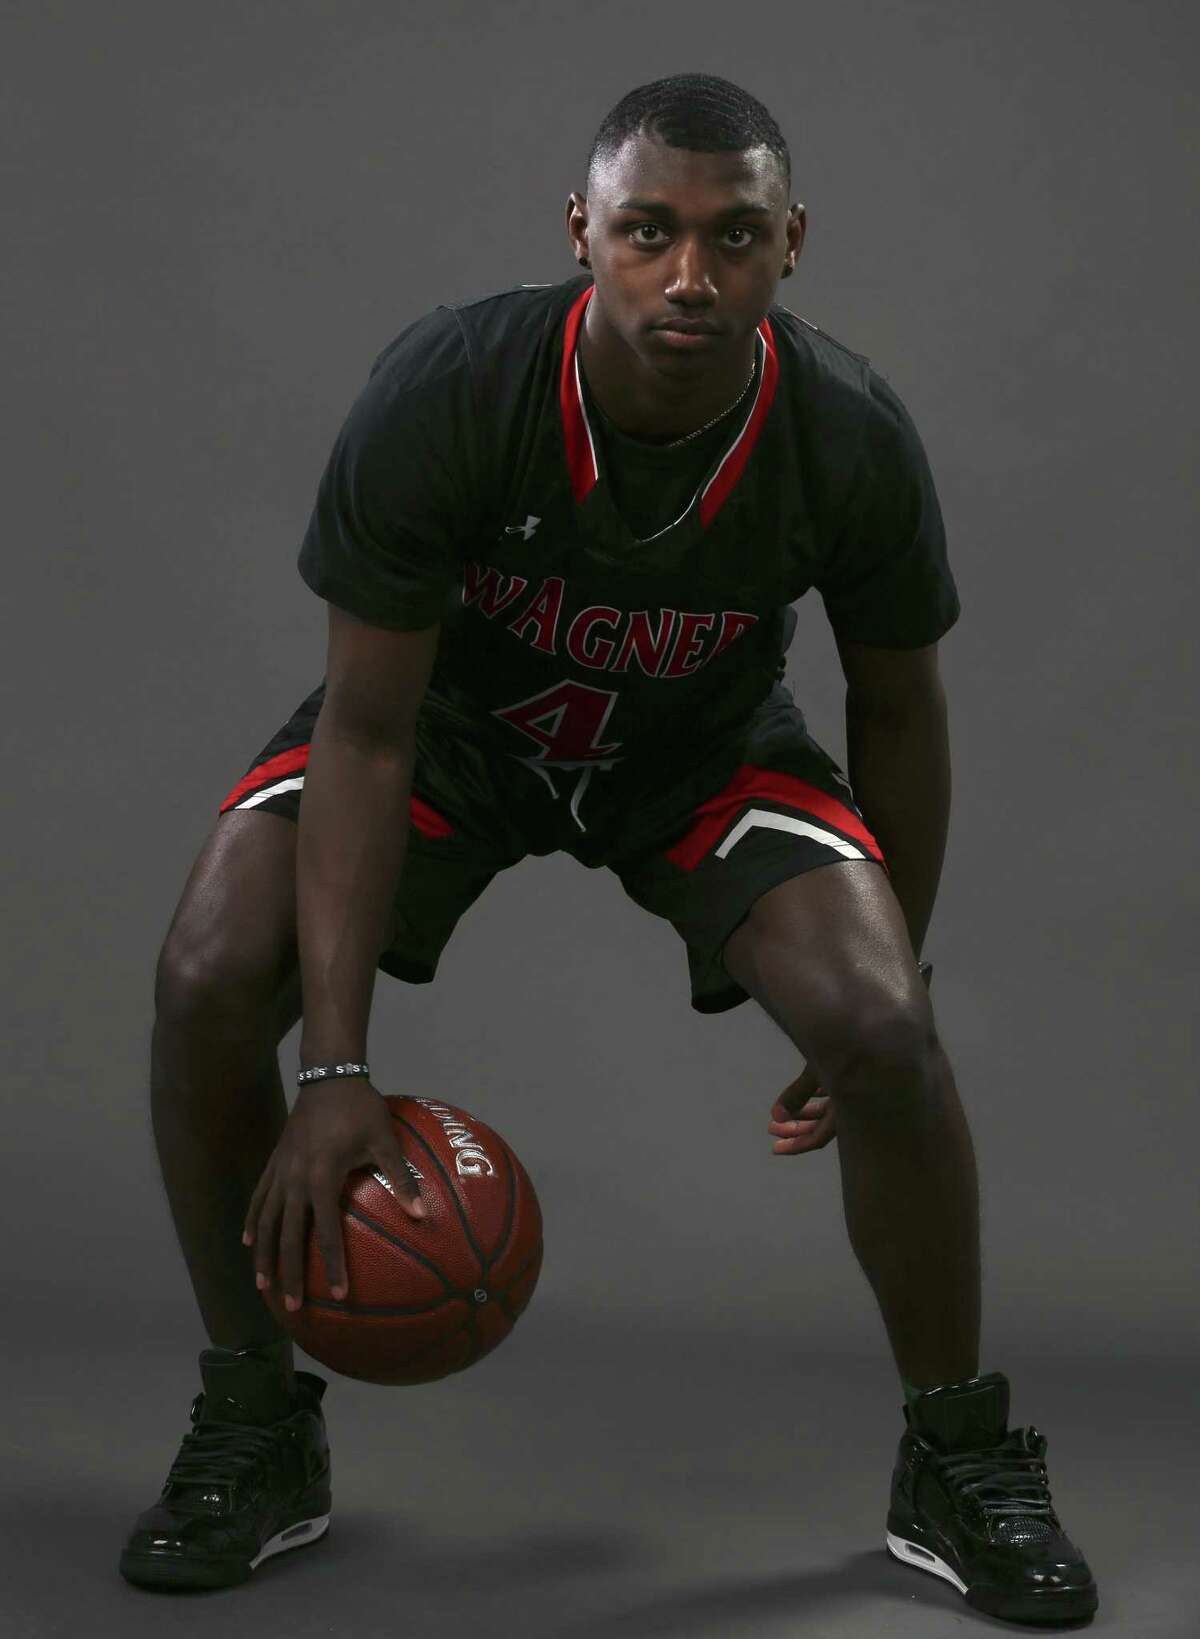 Jalen Jackson, a senior at Wagner High School, is part of the 2019 All-Area Boy's team, Sunday, March 24, 2019.